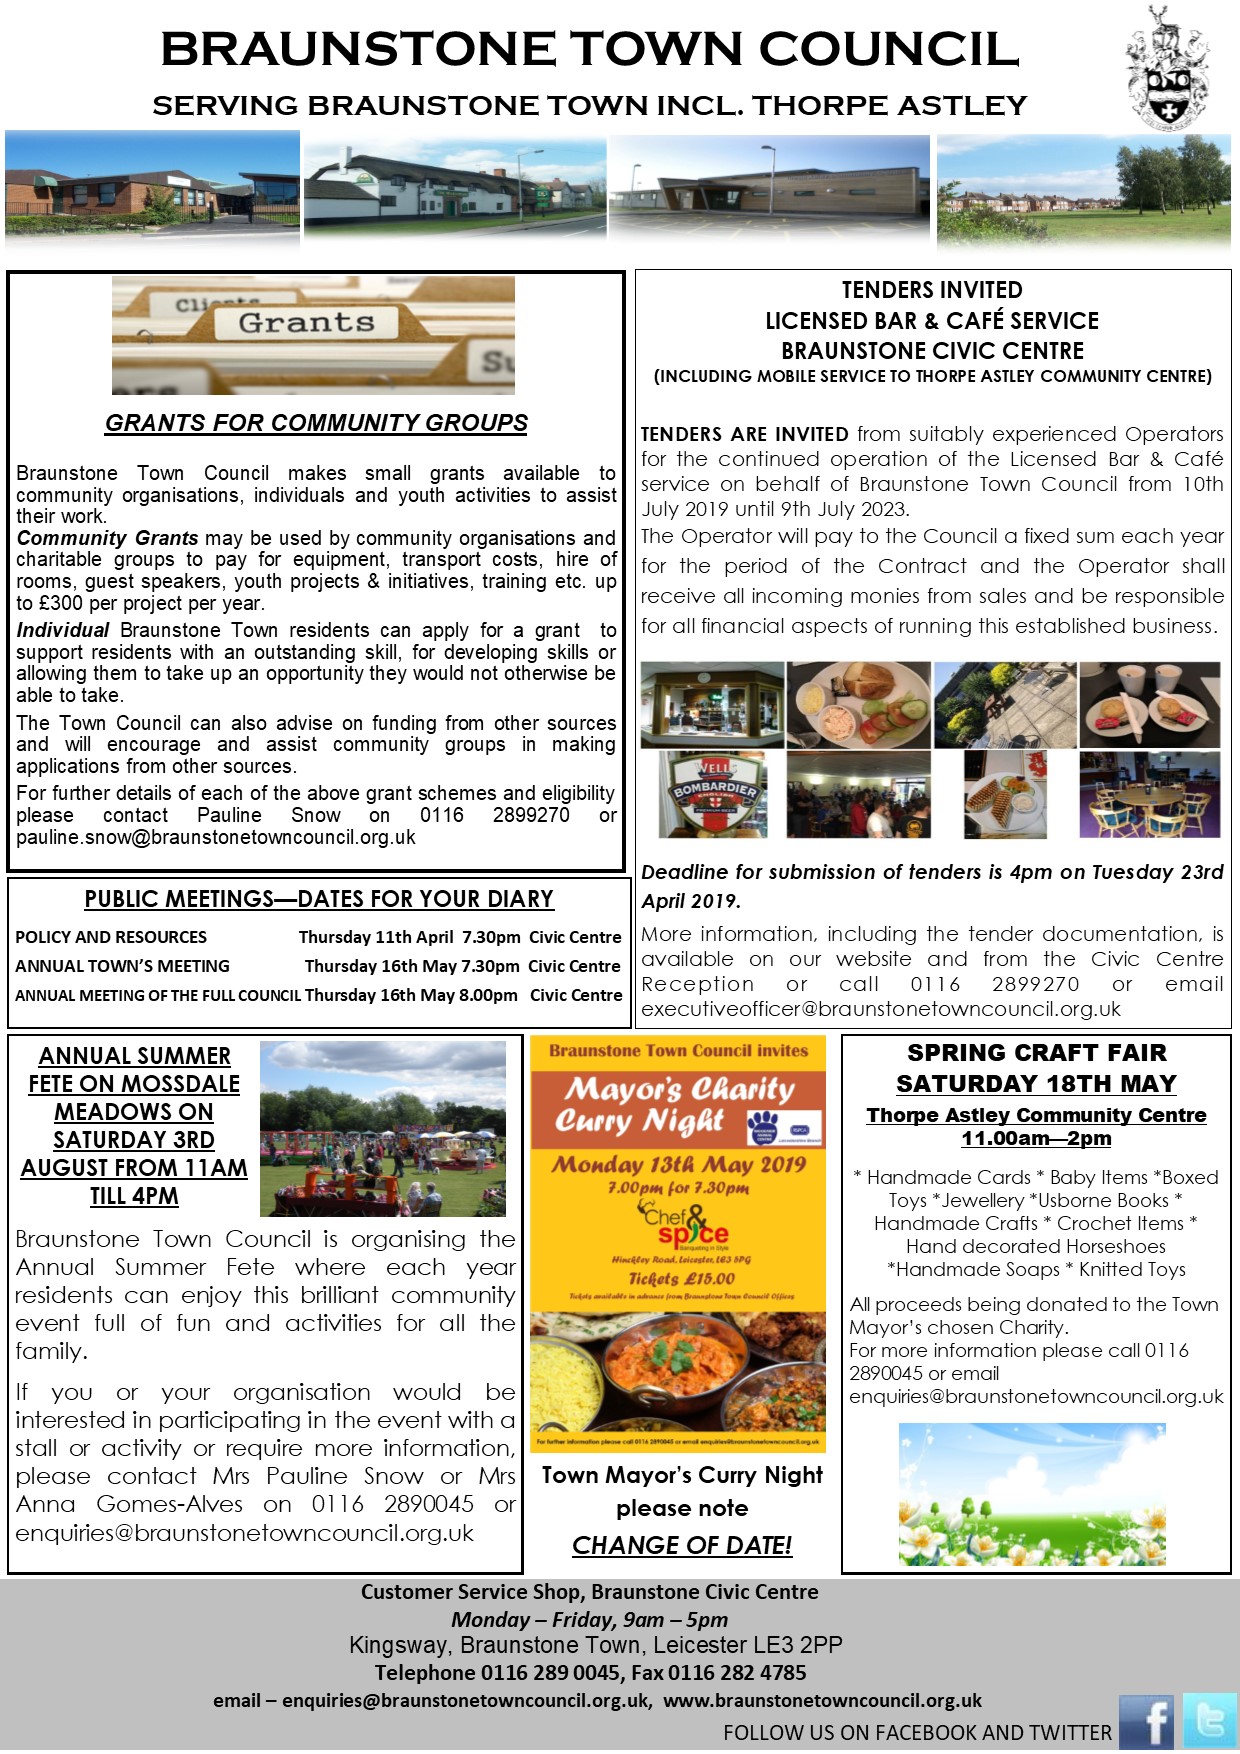 The Town Council article from the April 2019 issue of the Braunstone Life